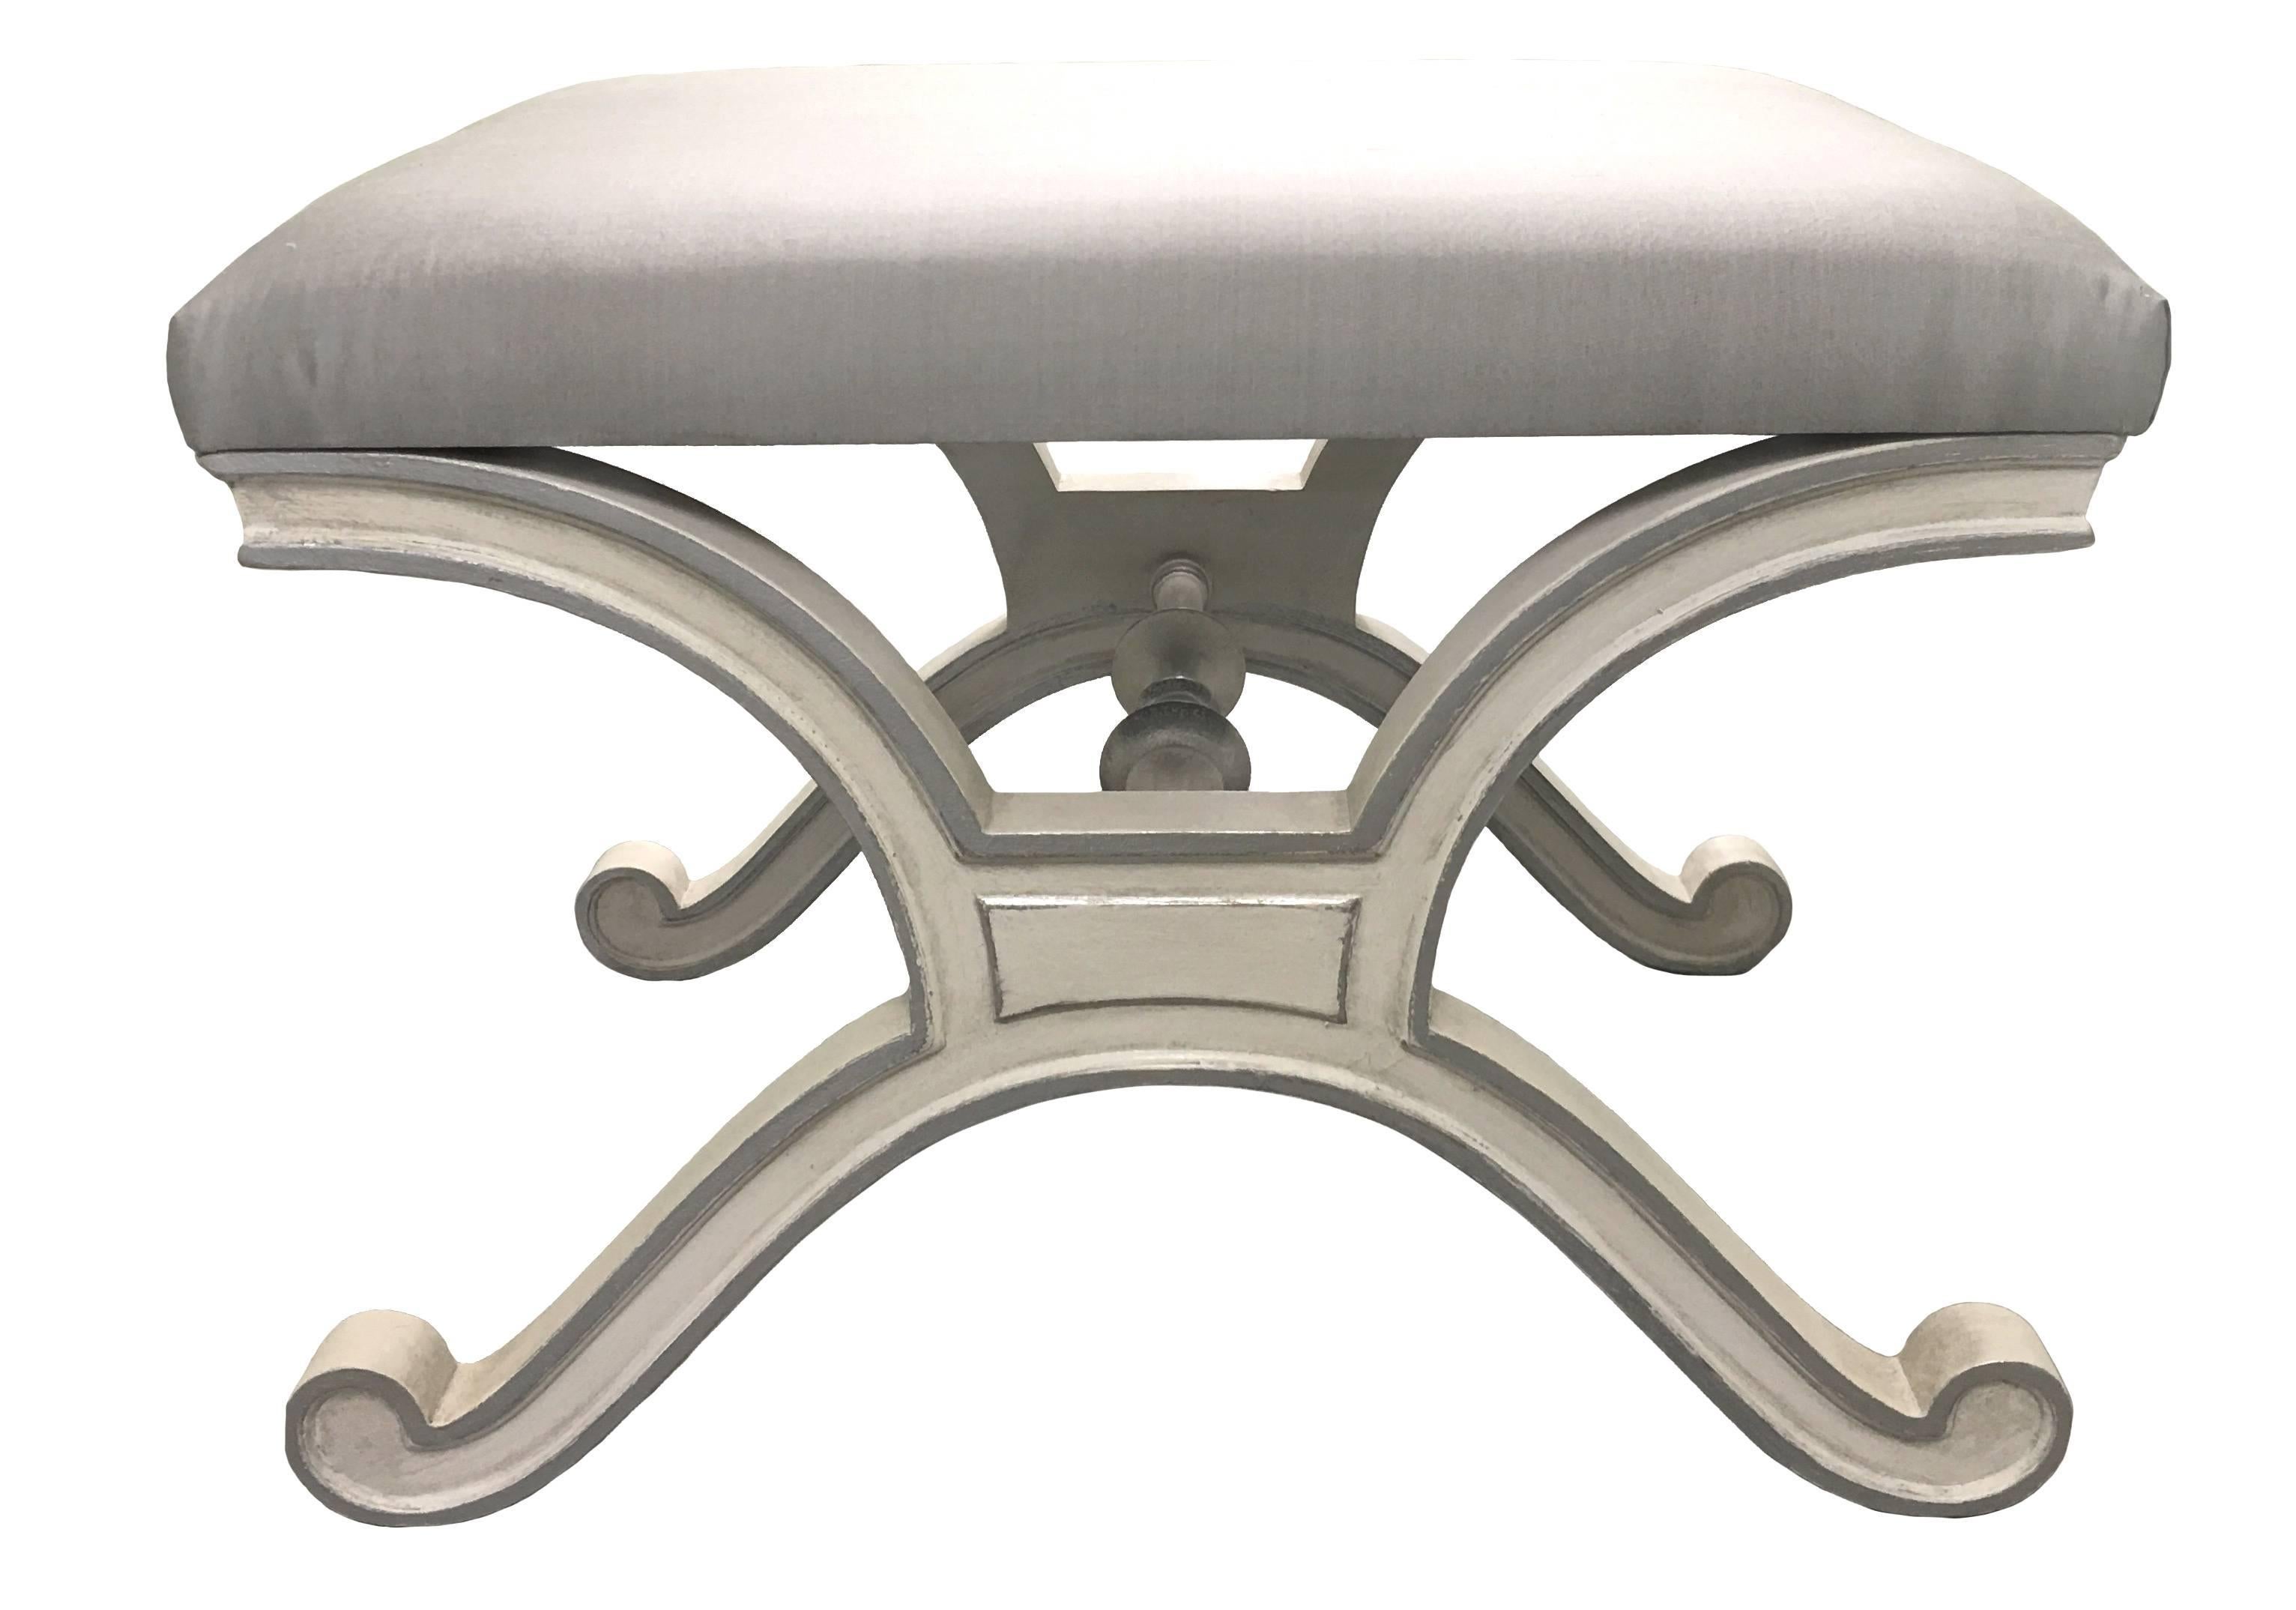 Pair of Dorothy Draper for Henredon Heritage Hollywood Regency style benches. Newly painted in an antique white finish with silver painted detailing. Newly upholstered in grey silk fabric. One bench retains original Heritage Henredon label.